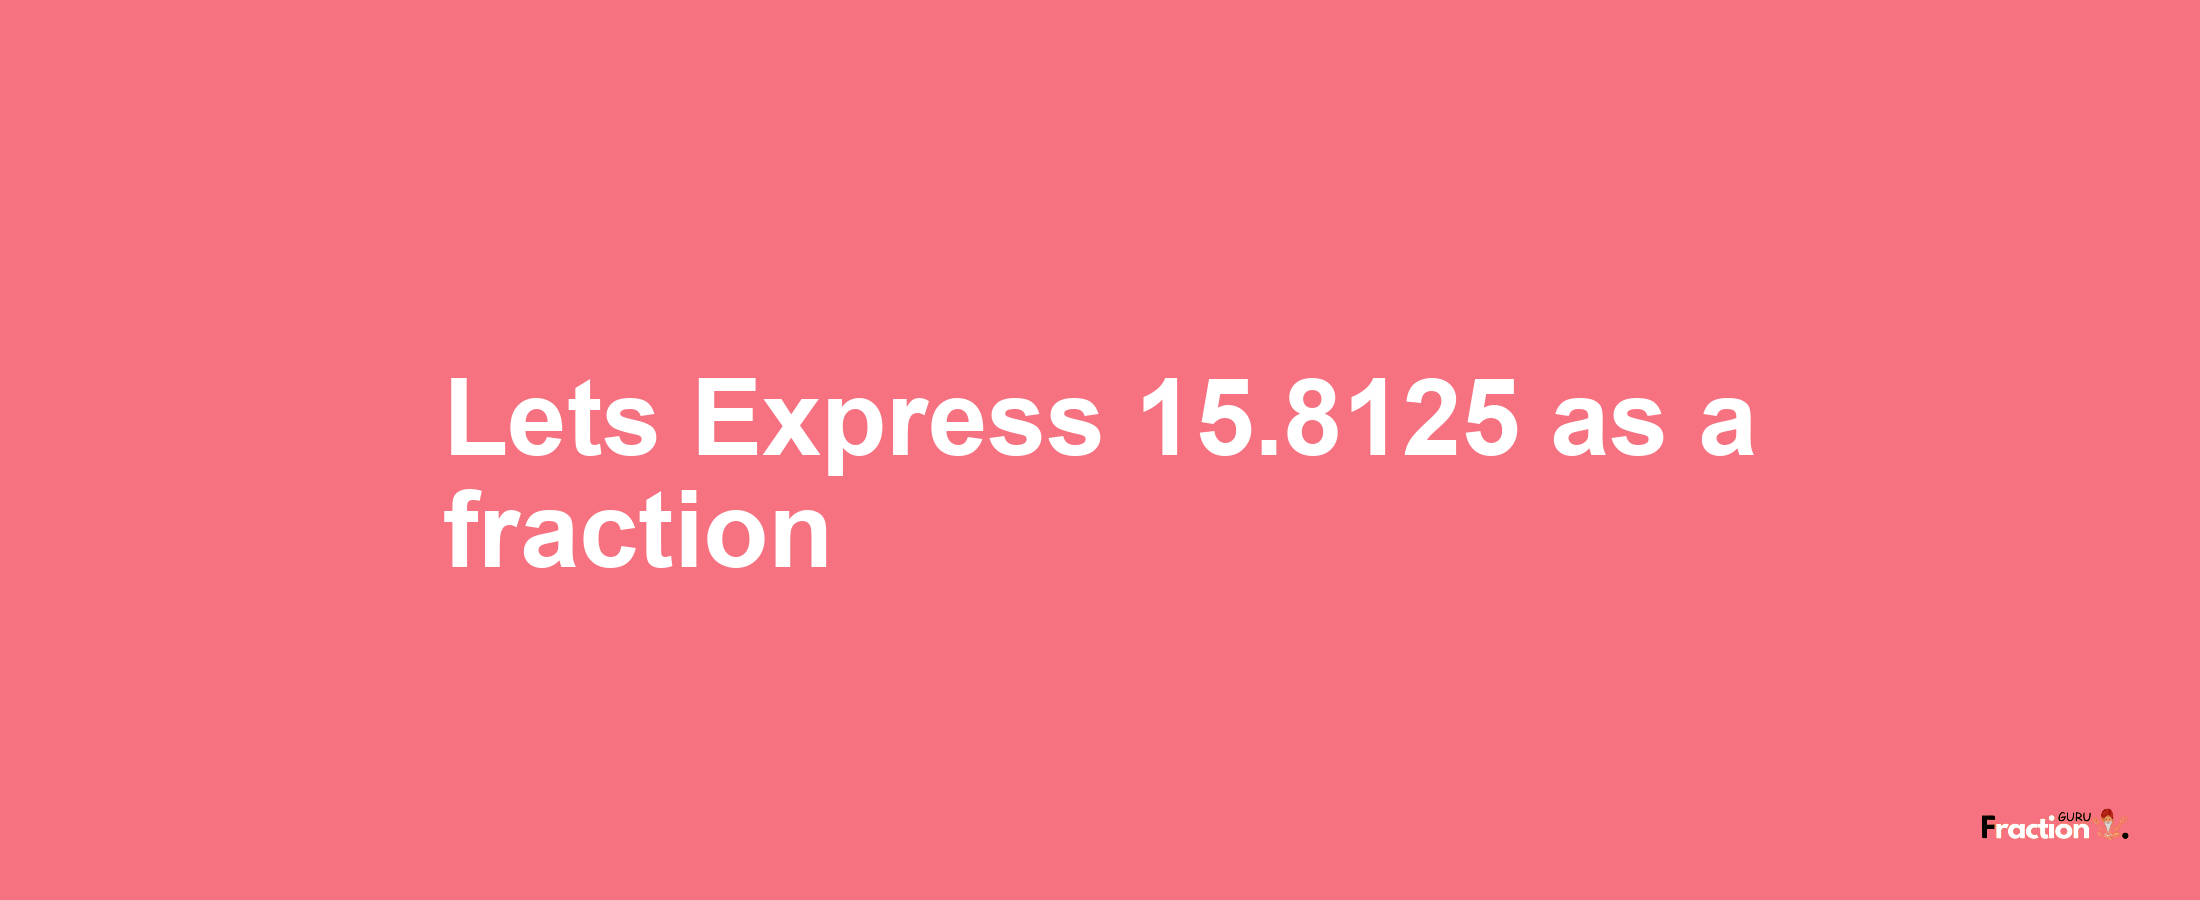 Lets Express 15.8125 as afraction